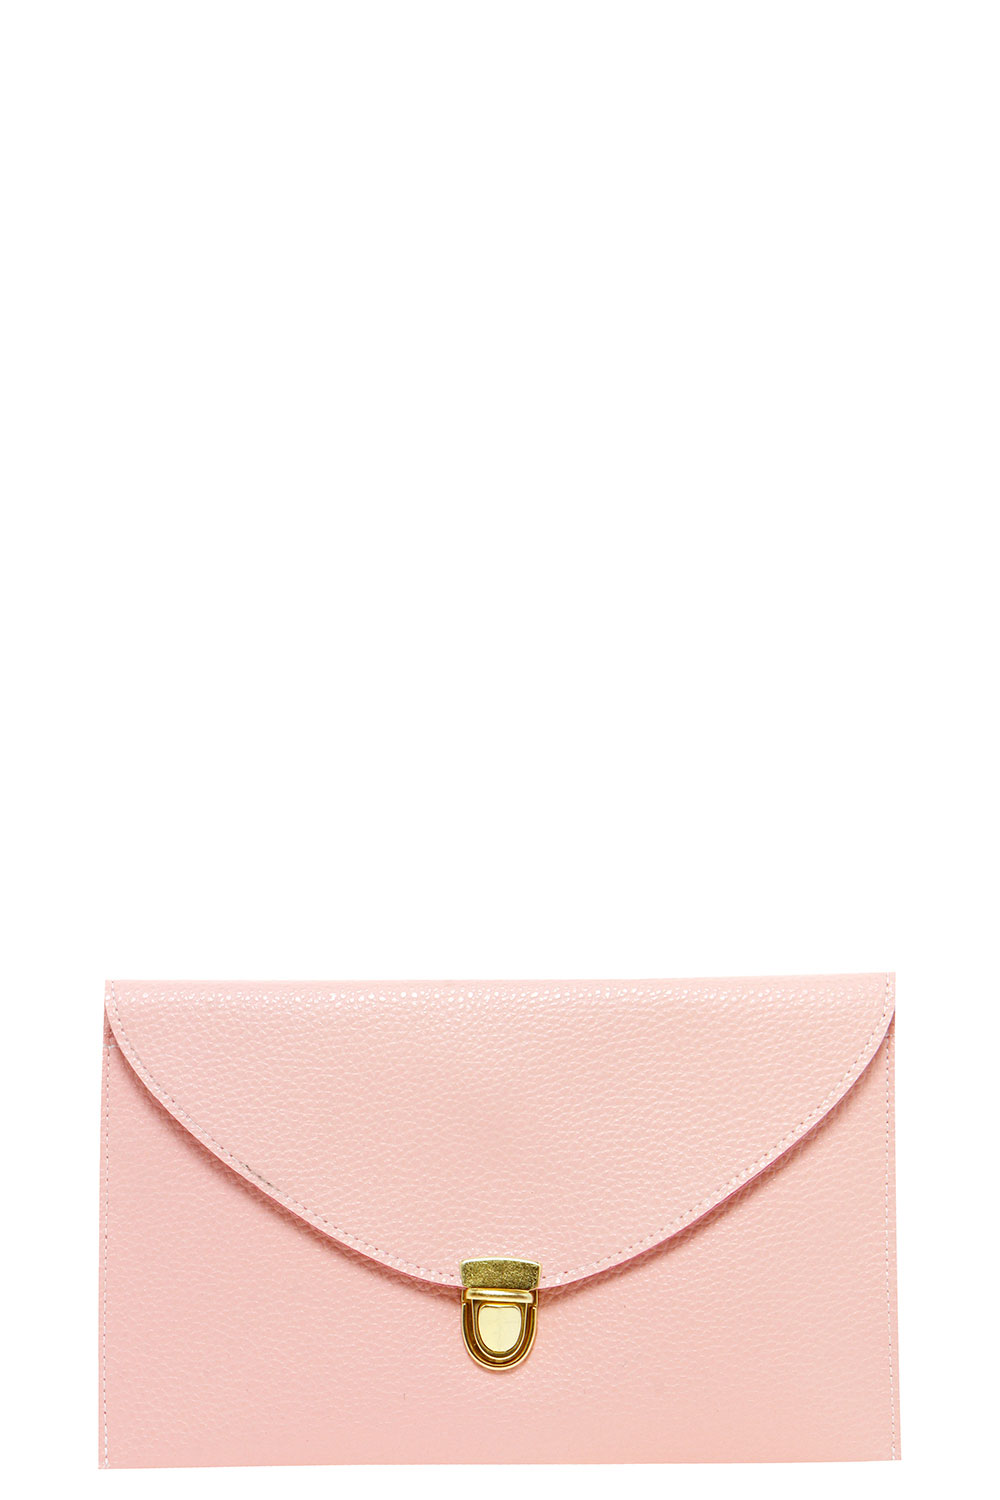 boohoo Lily Clasp Fasten Clutch Bag - pink